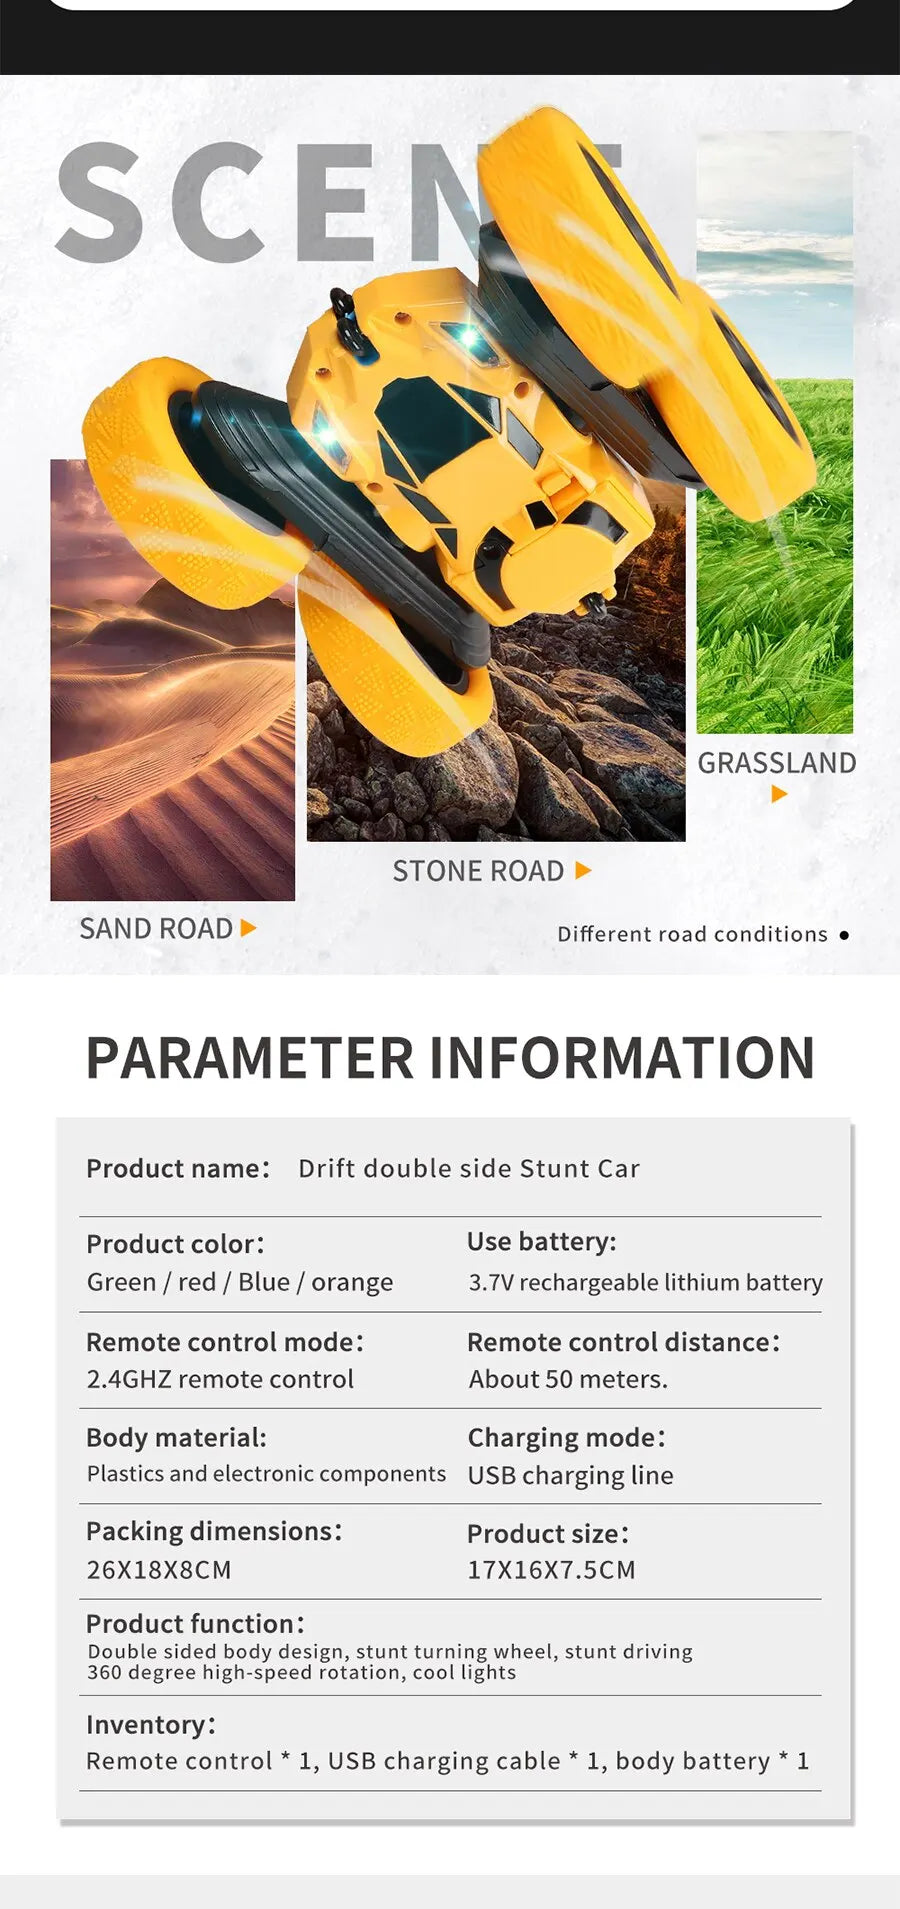 RC Stunt Car, GRASSLAND STONE ROAD SAND ROAD Different road conditions PARAMETER INFORMATION Product